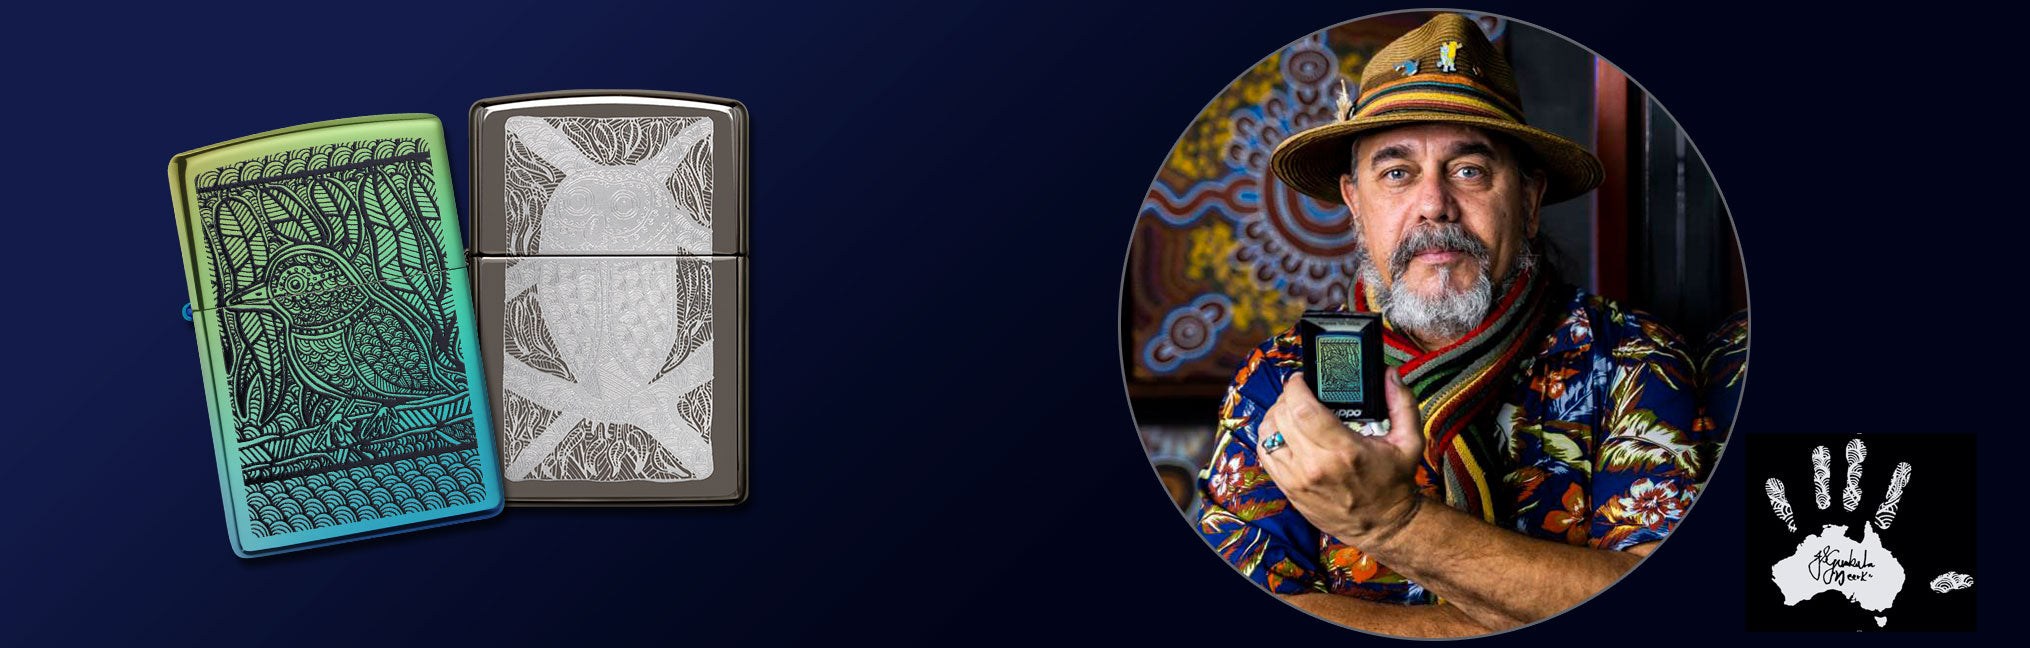 Banner for the John Smith Gumbula Lighters collection